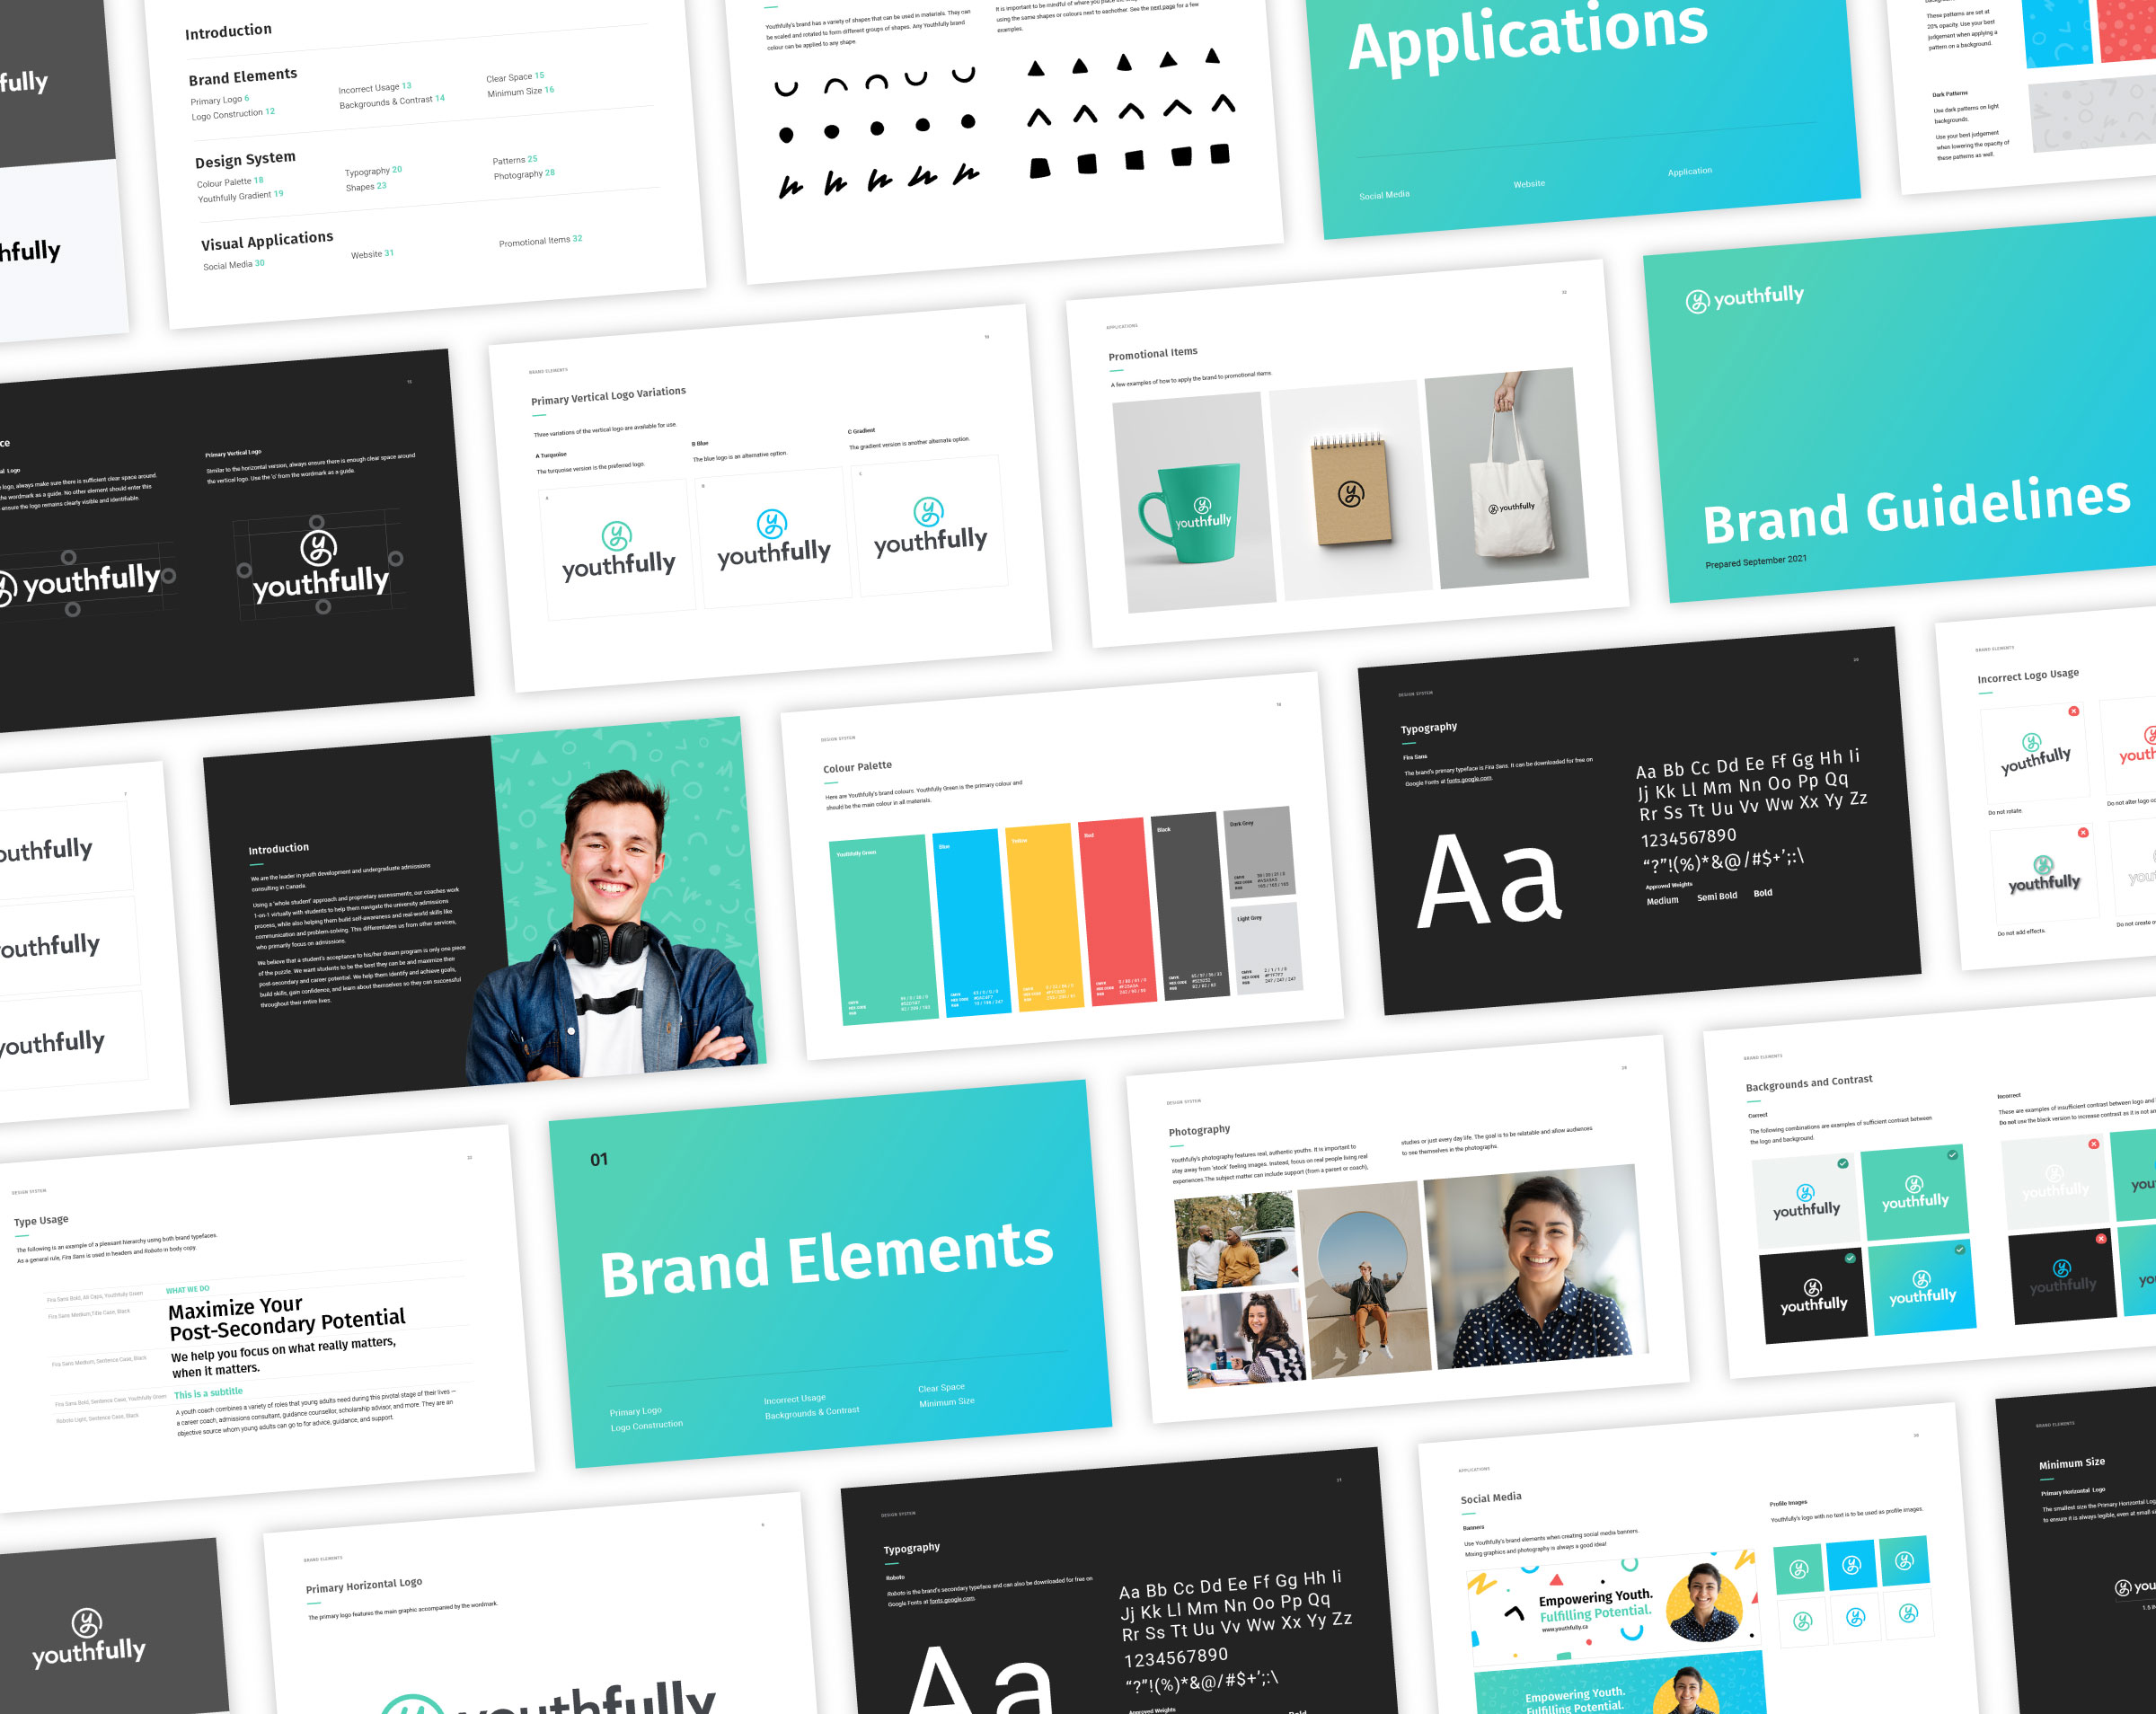 Collage of pages of the brand guidelines.